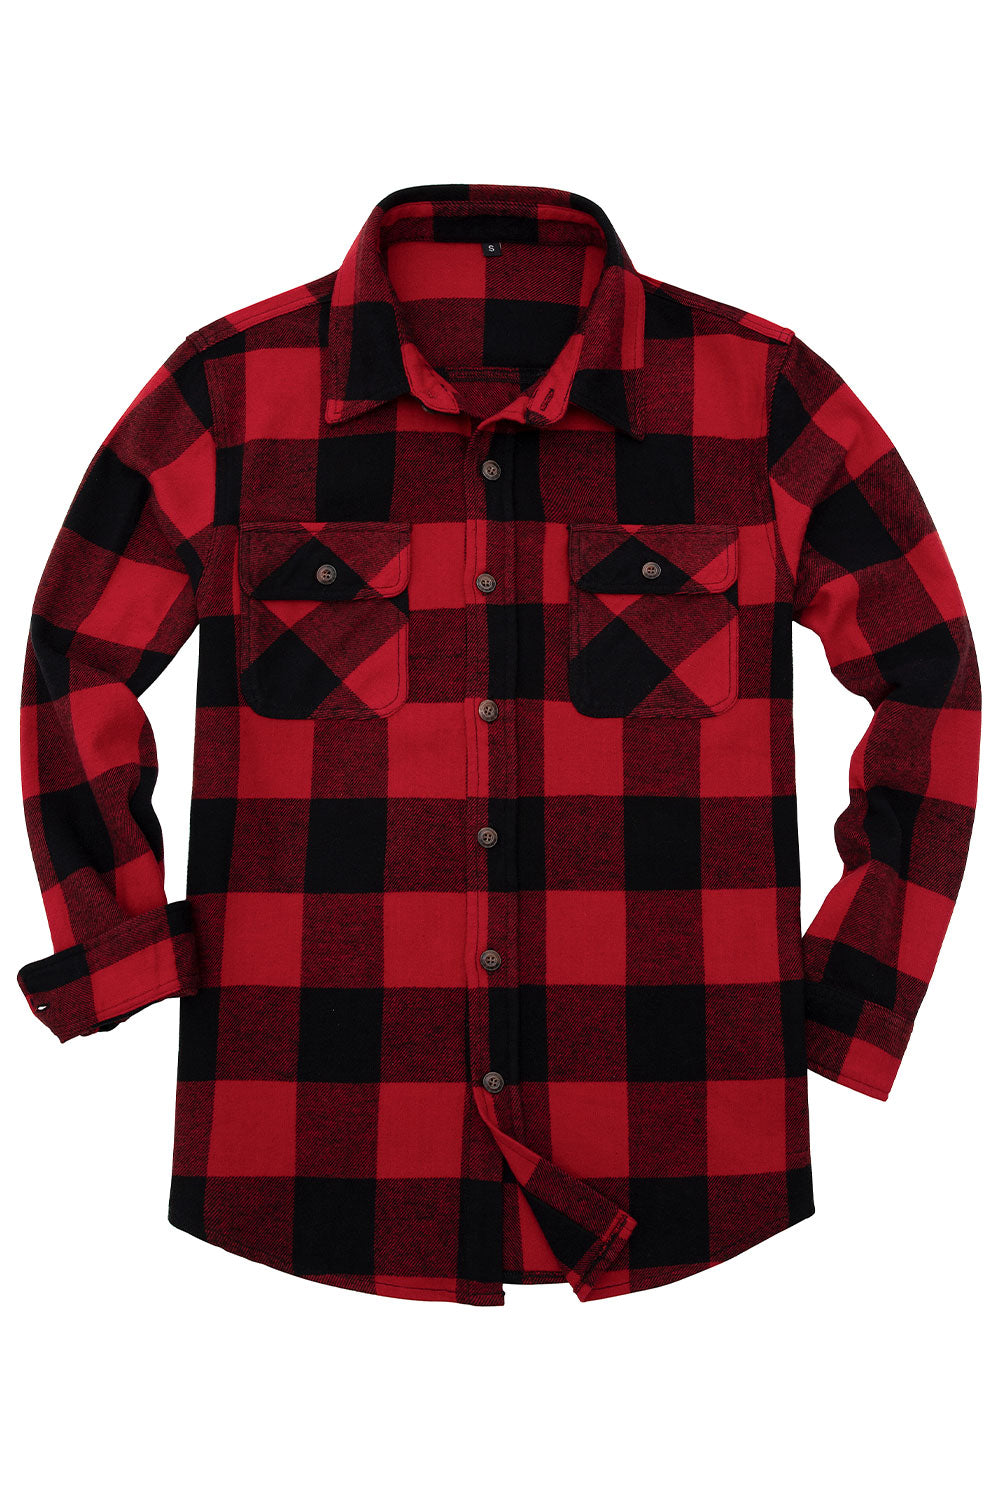 FlannelGo Mens Heavy Flannel Shirts,Double Brushed Cotton 10.6oz